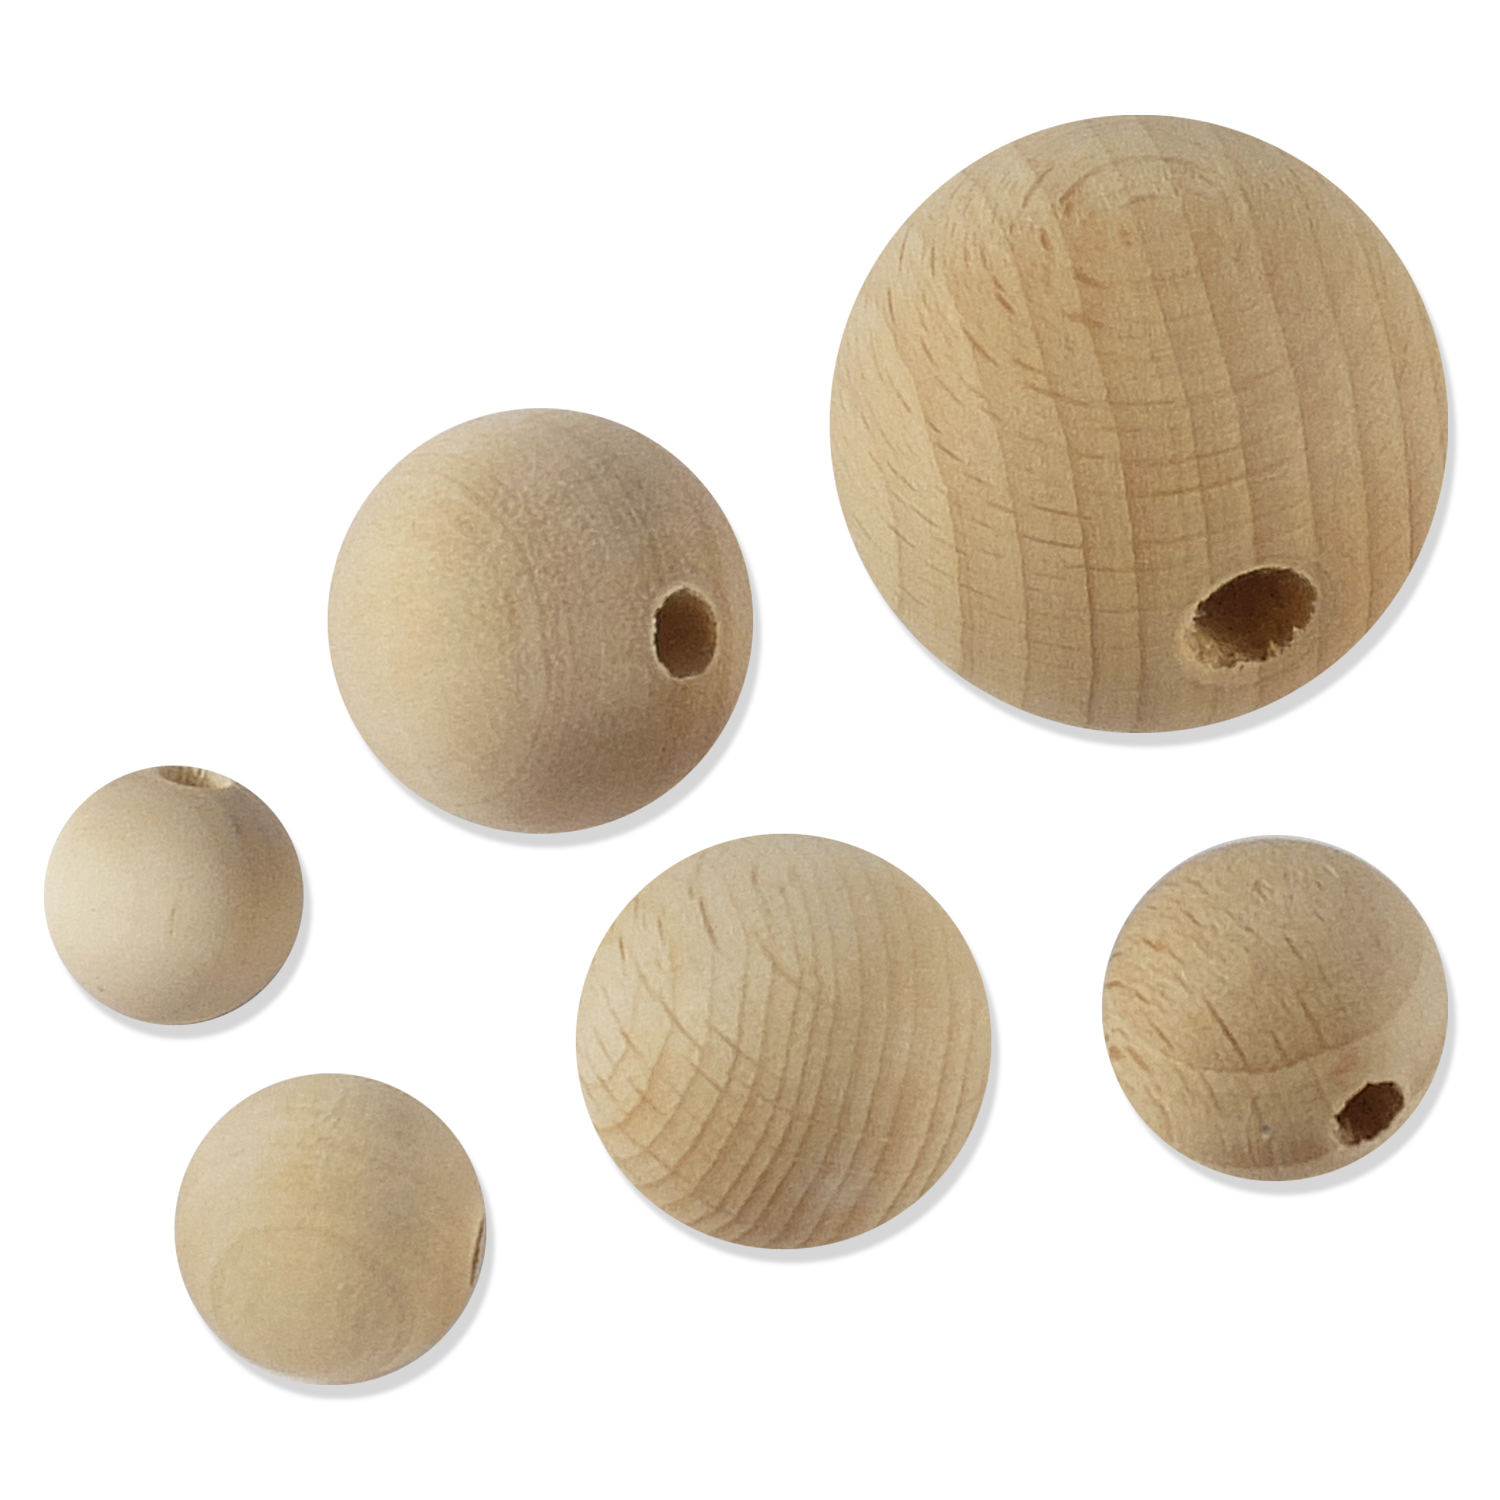 Wooden beads and beads